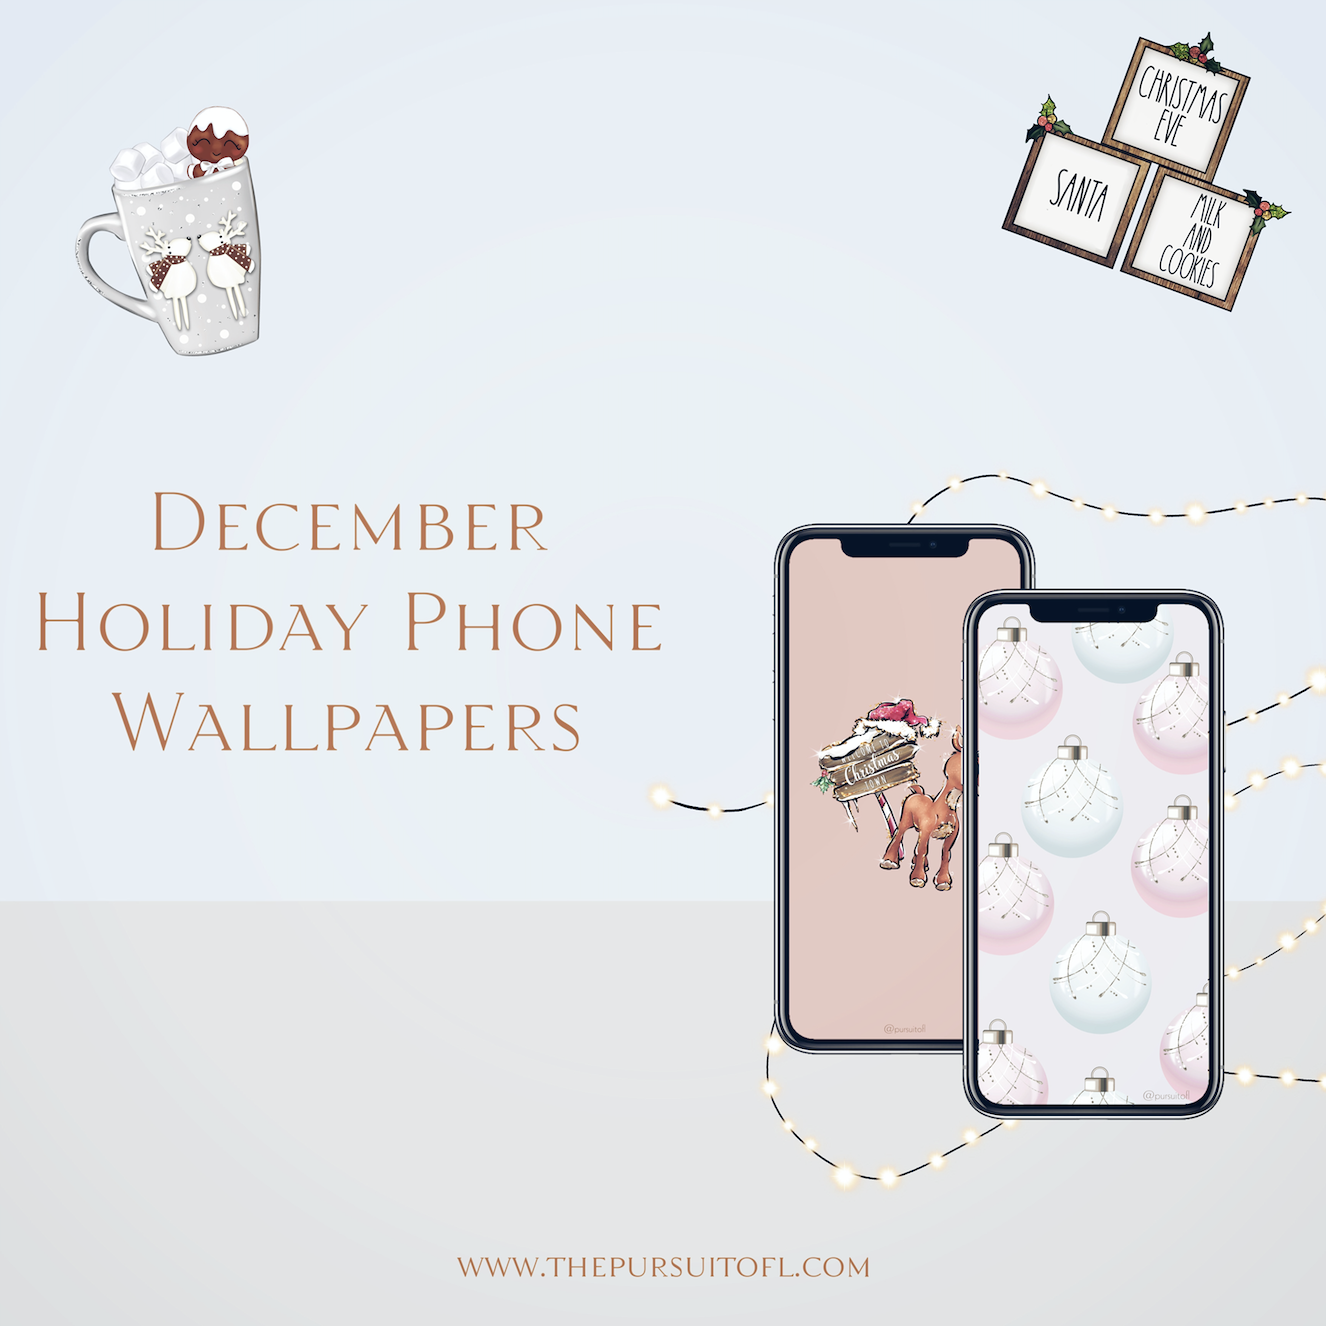 December Holiday Phone Wallpapers